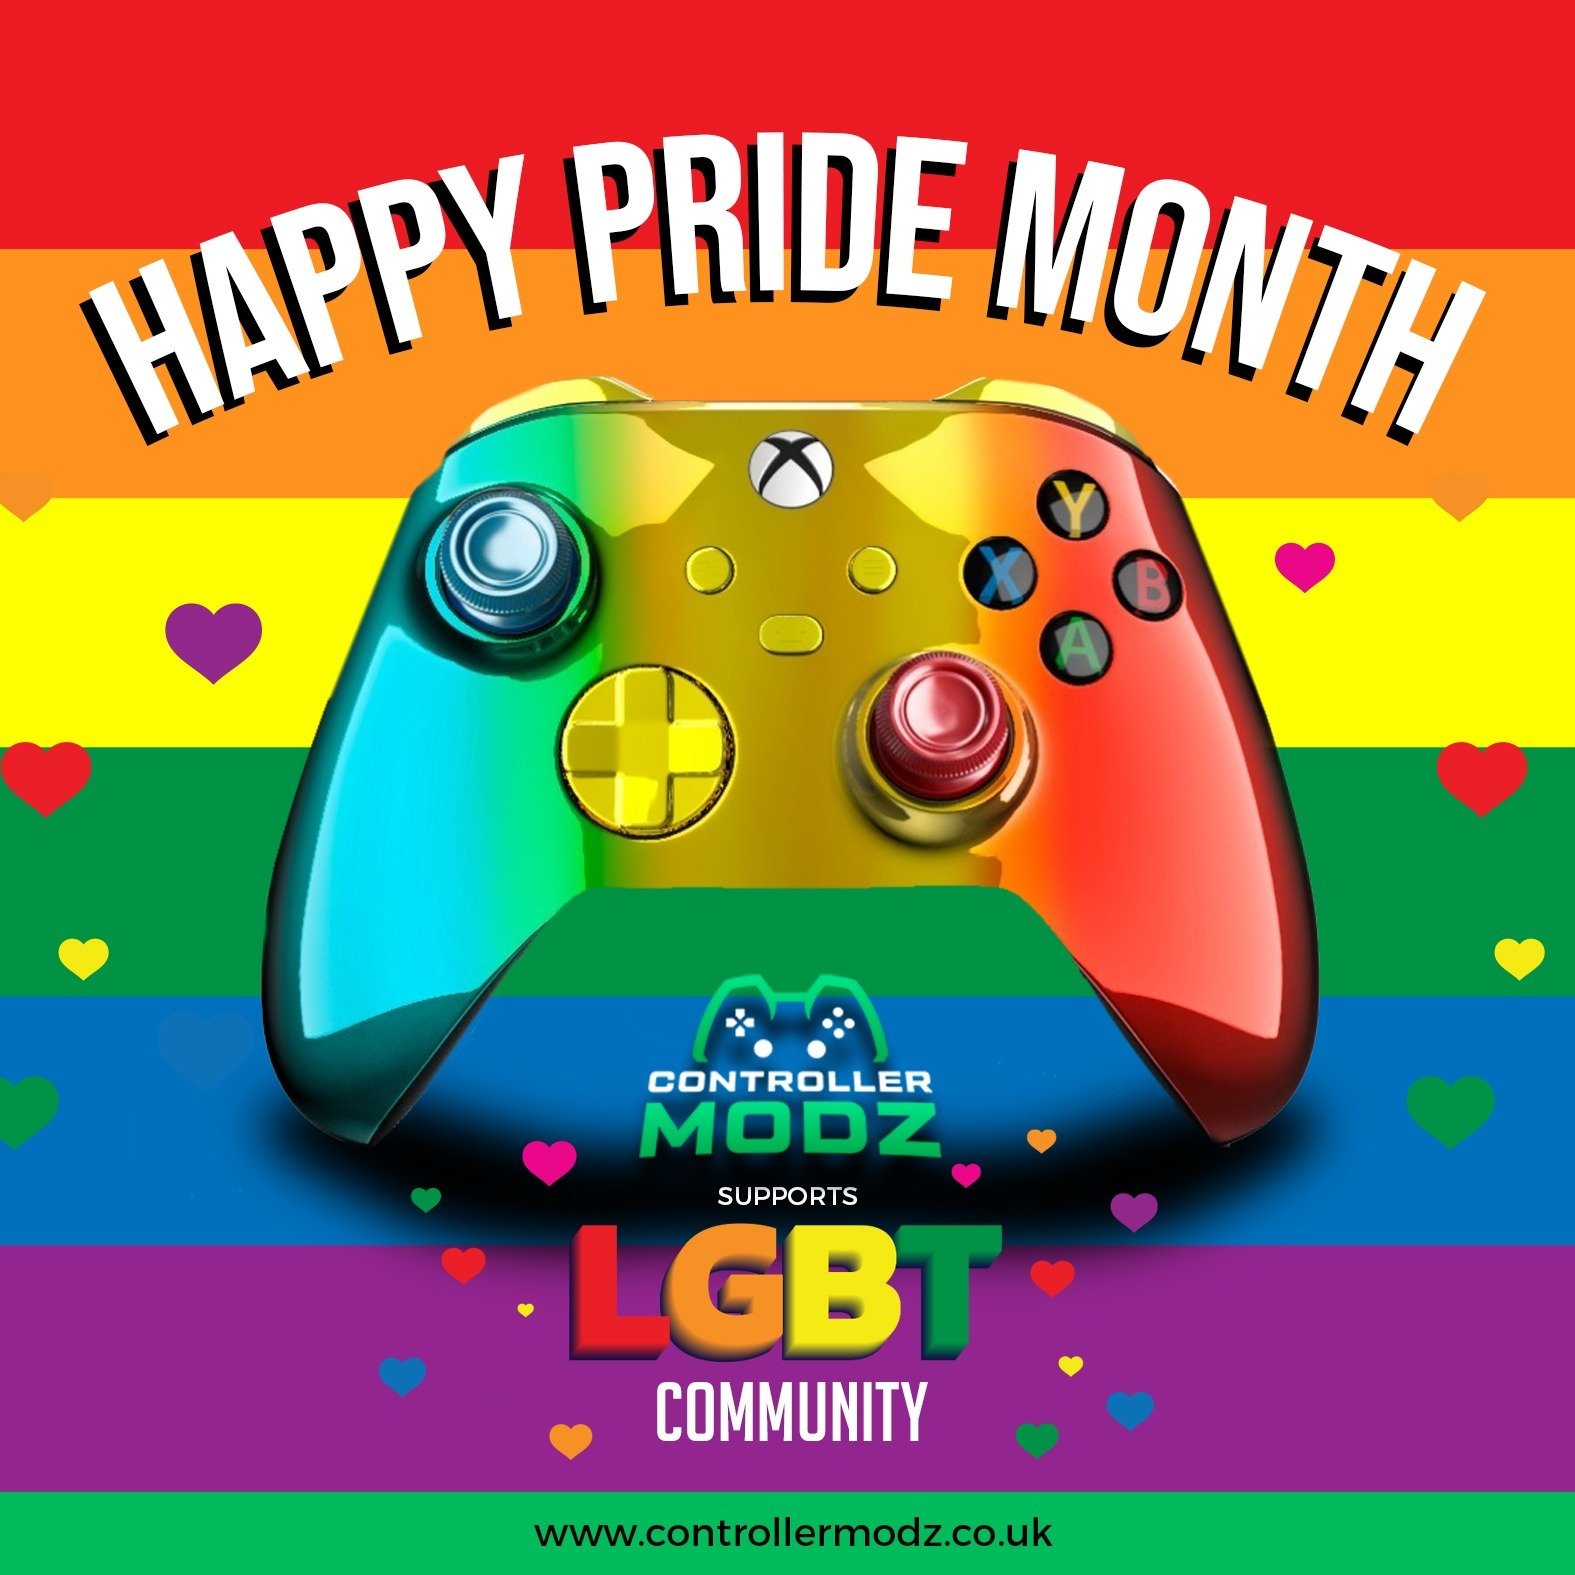 ControllerModz on Twitter: "Happy Pride Month from all of us Controller Modz! 🌈 Create-Your-Own controller at: ⏩ https://t.co/ob8Lybabn4 ⏪ #gamer # ps4 #ps5 #xboxone #pcgamer #pride #pridemonth #LGBT #controller #bespoke https://t.co/9nNgYJVjel"